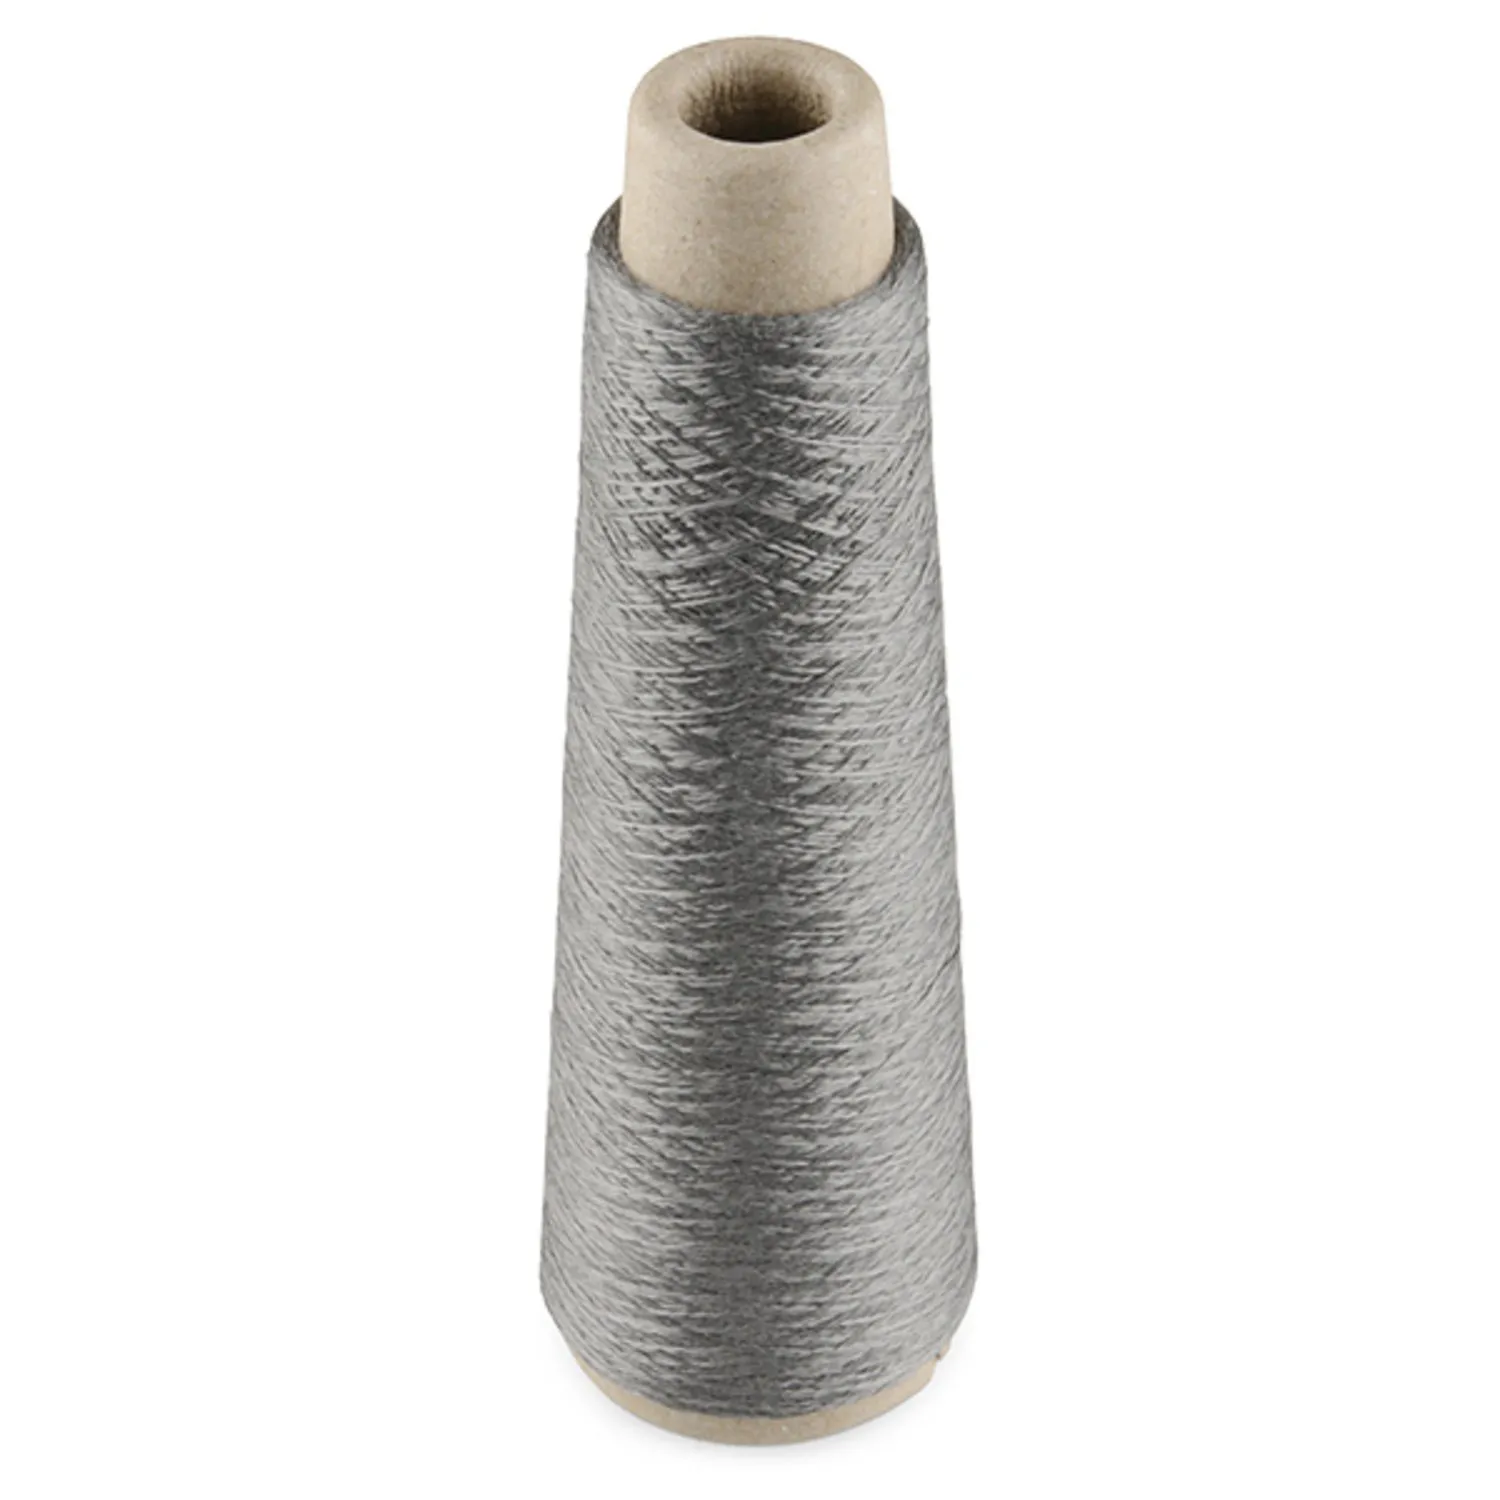 Photo of Conductive Thread - 60g (Stainless Steel)